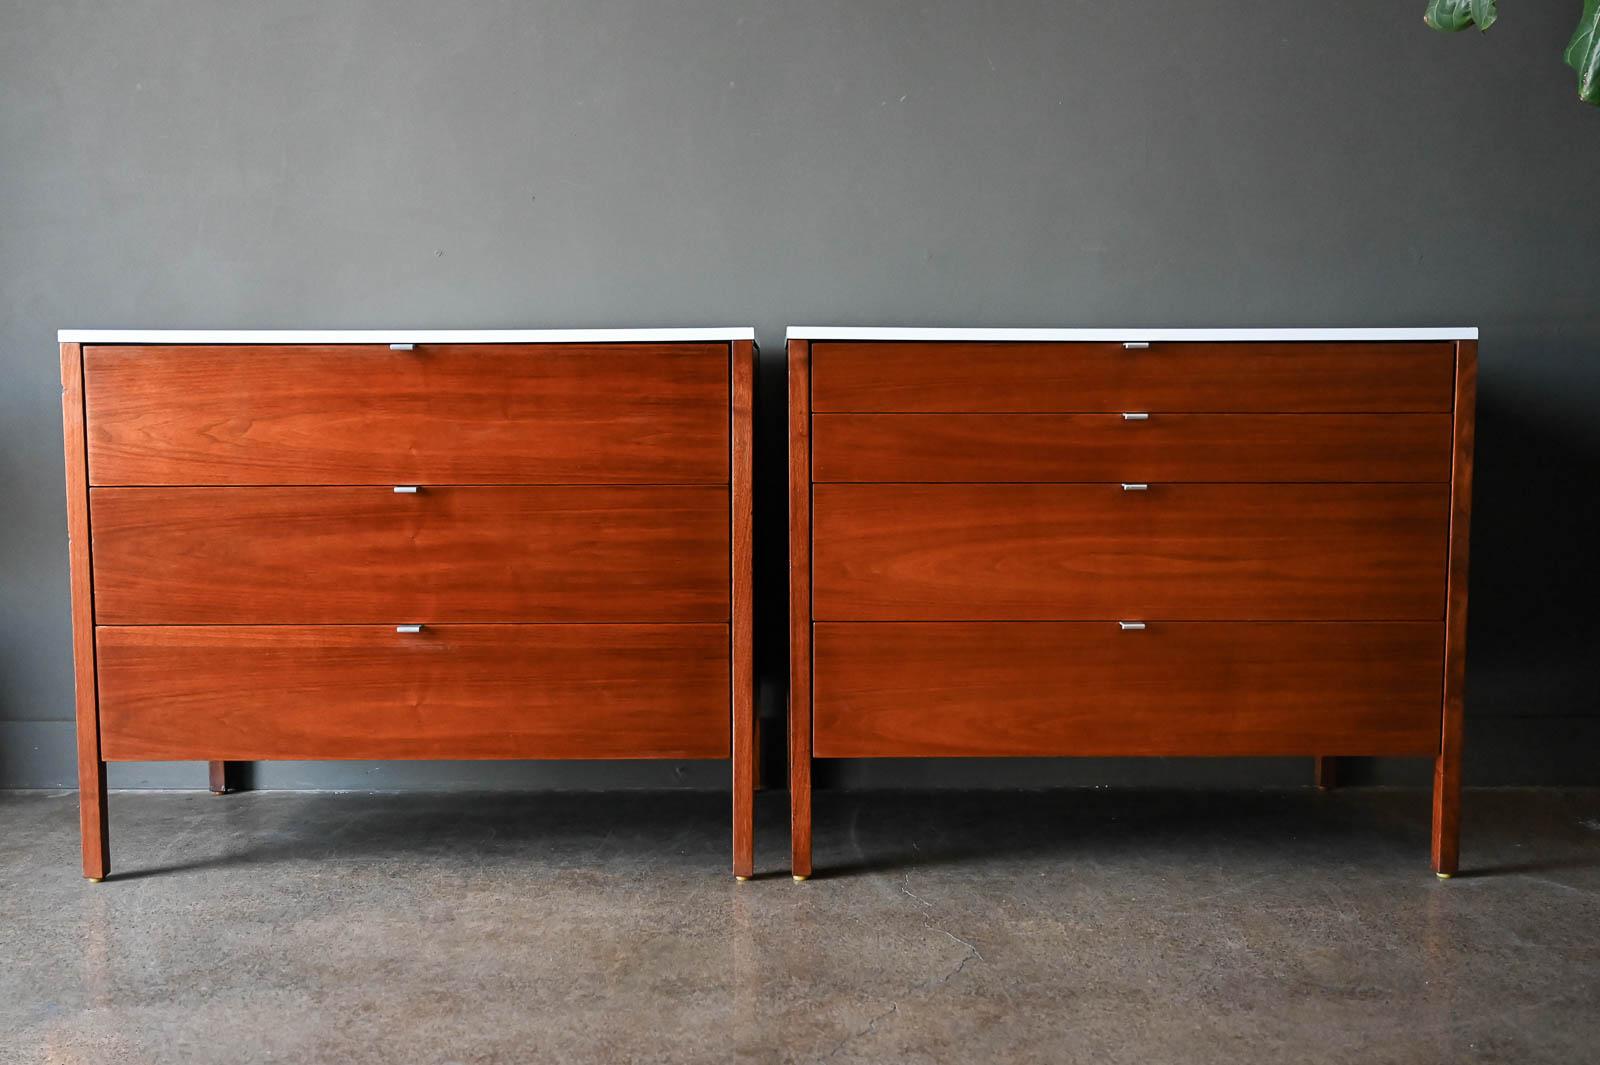 Pair of walnut cabinets by Florence Knoll, ca. 1960. Beautiful matched pair of walnut cabinets or chests by Florence Knoll for Knoll, inc. These pieces have wonderful book matched walnut grain with white laminate tops. The backs are also done in